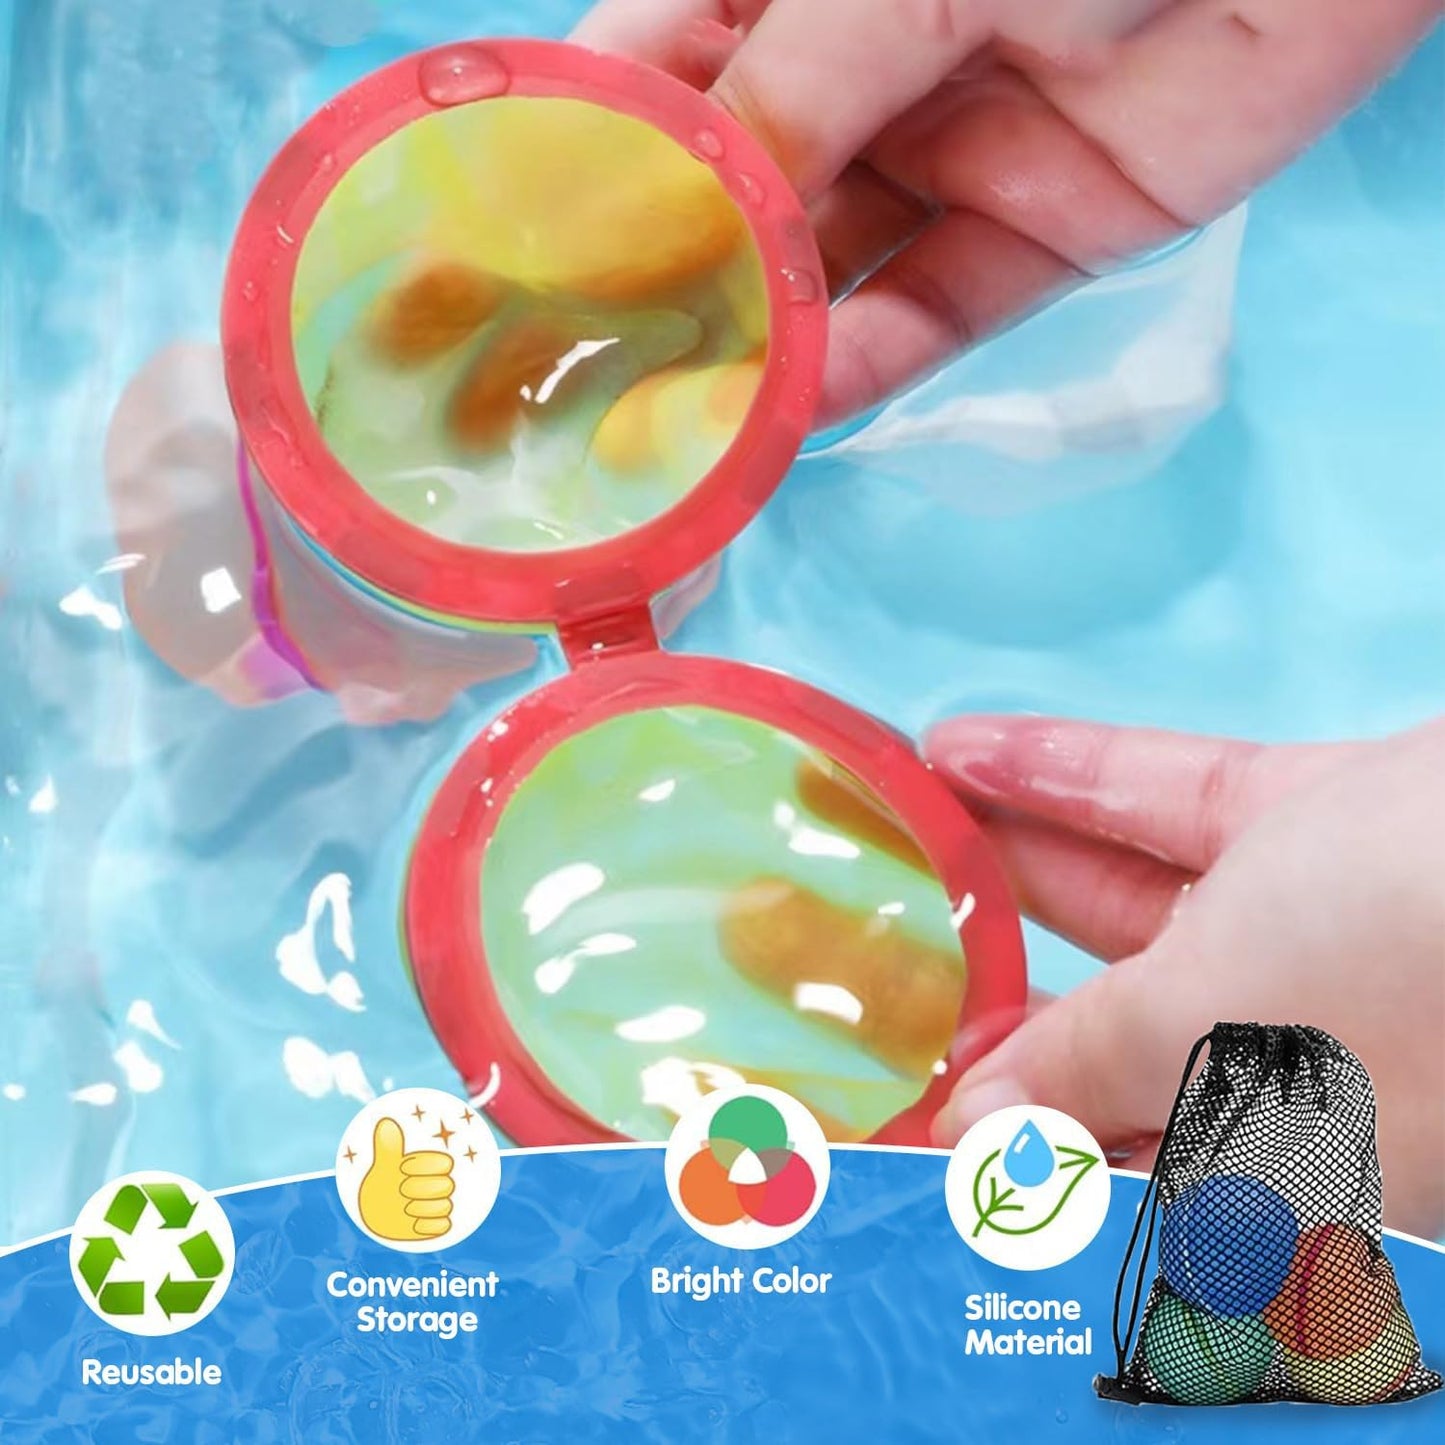 Reusable Water Balloons for Kids,24 PCS Magnetic Refillable Latex-Free Silicone Water Bomb with Mesh Bag, Summer Toys Beach Toys Swimming Pool Party Supplies Bath Toy Outdoor Idea Gift for Kids